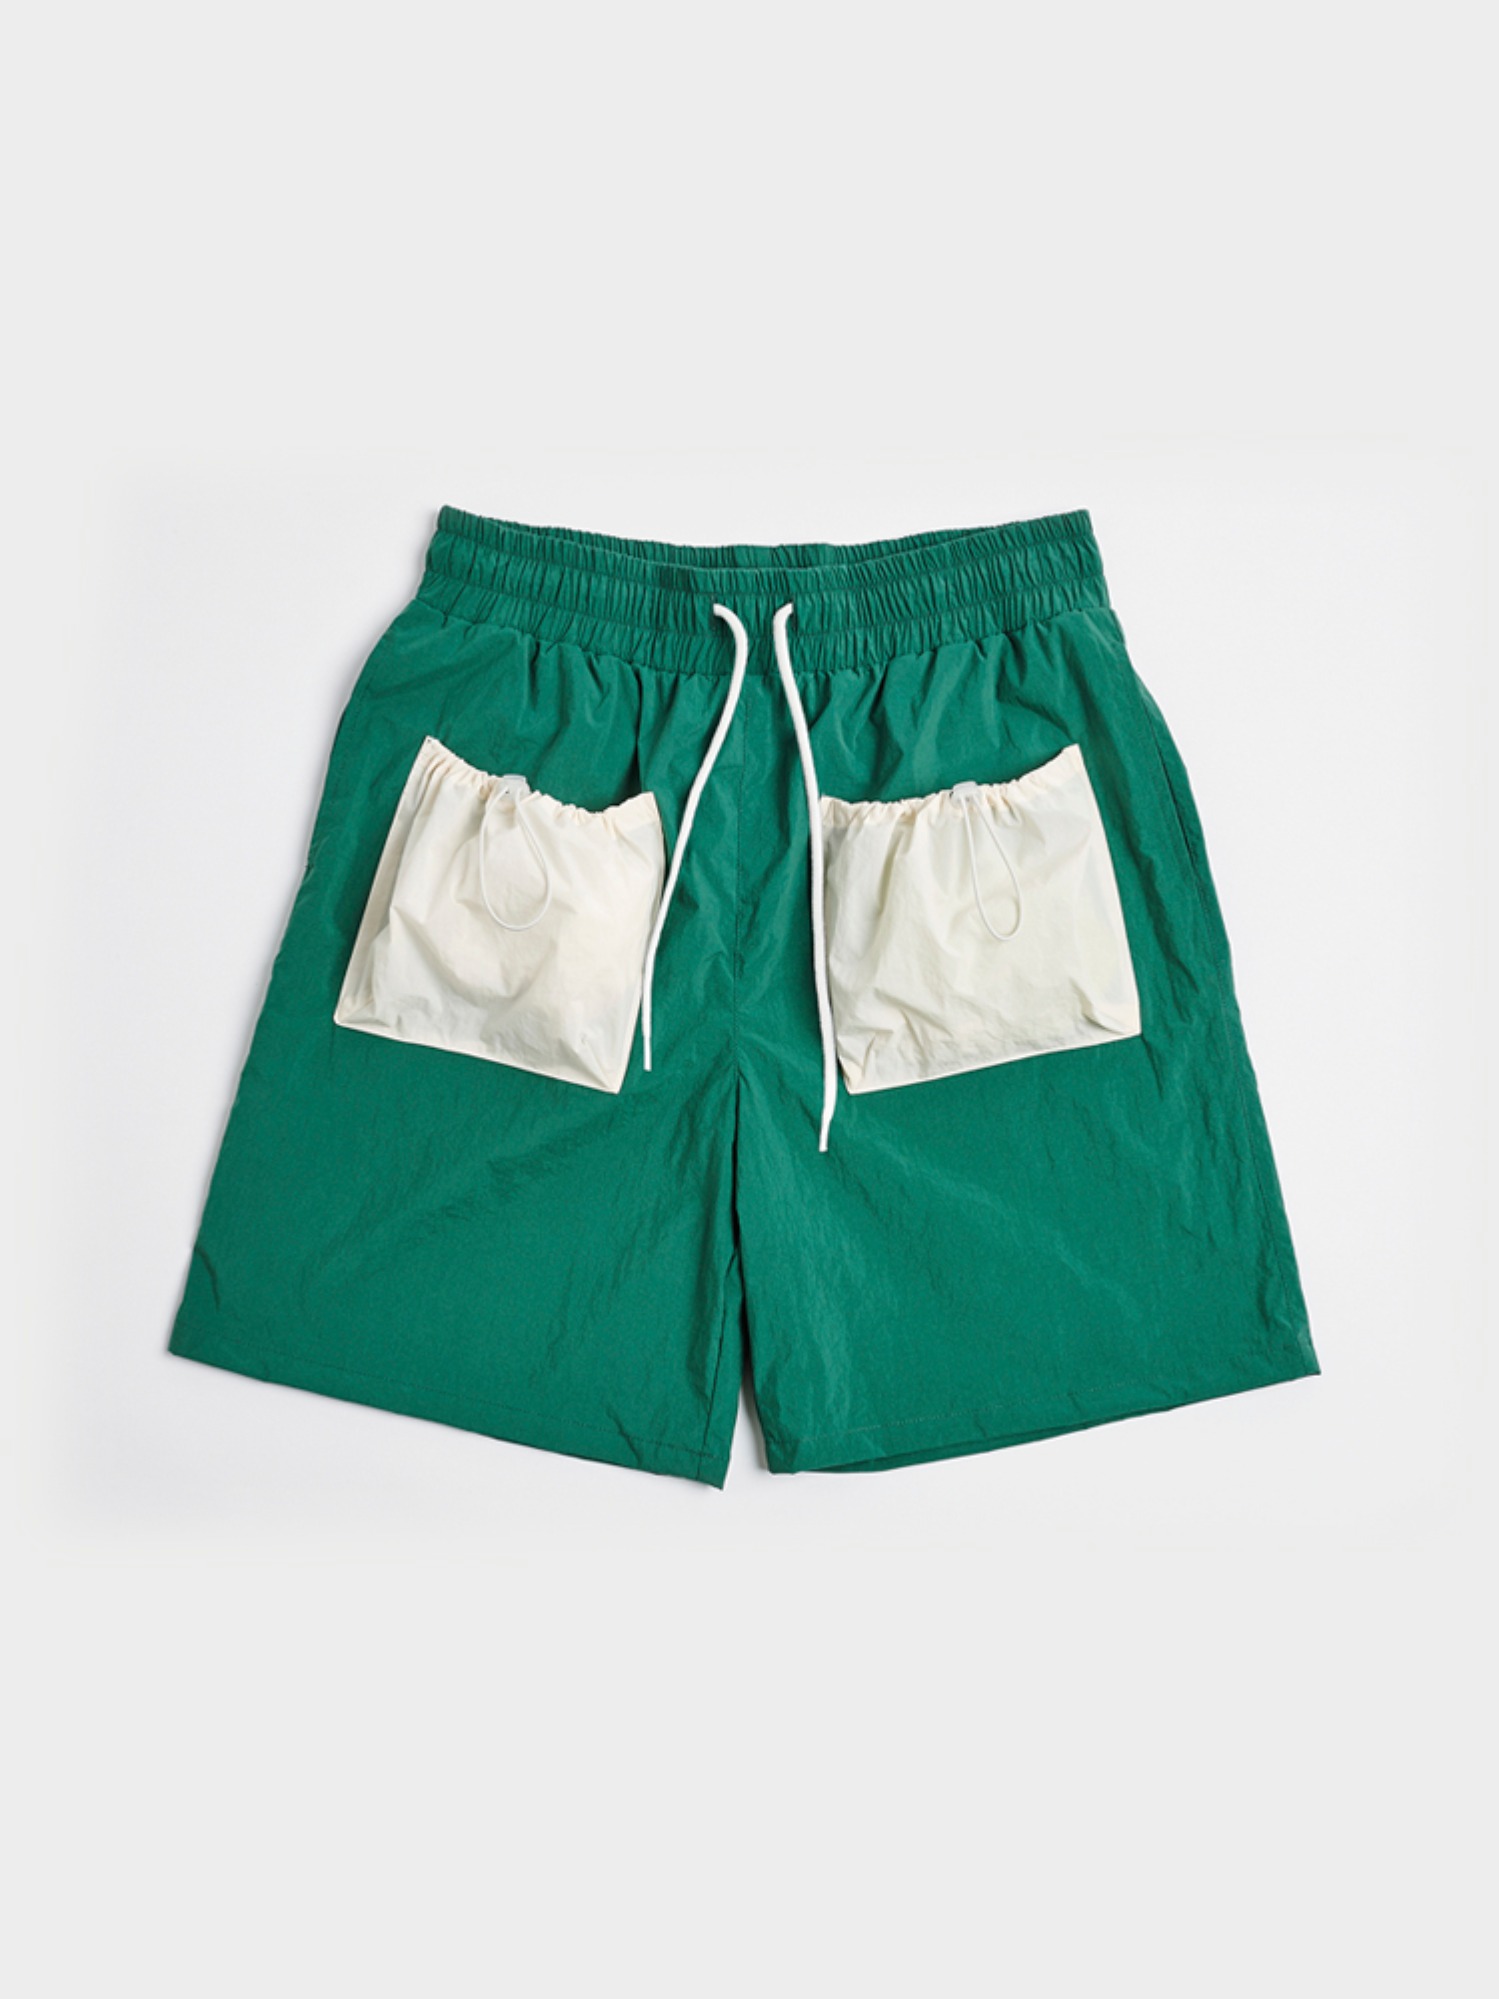 2 Pockets Shorts (Forest Green &amp; Cream)